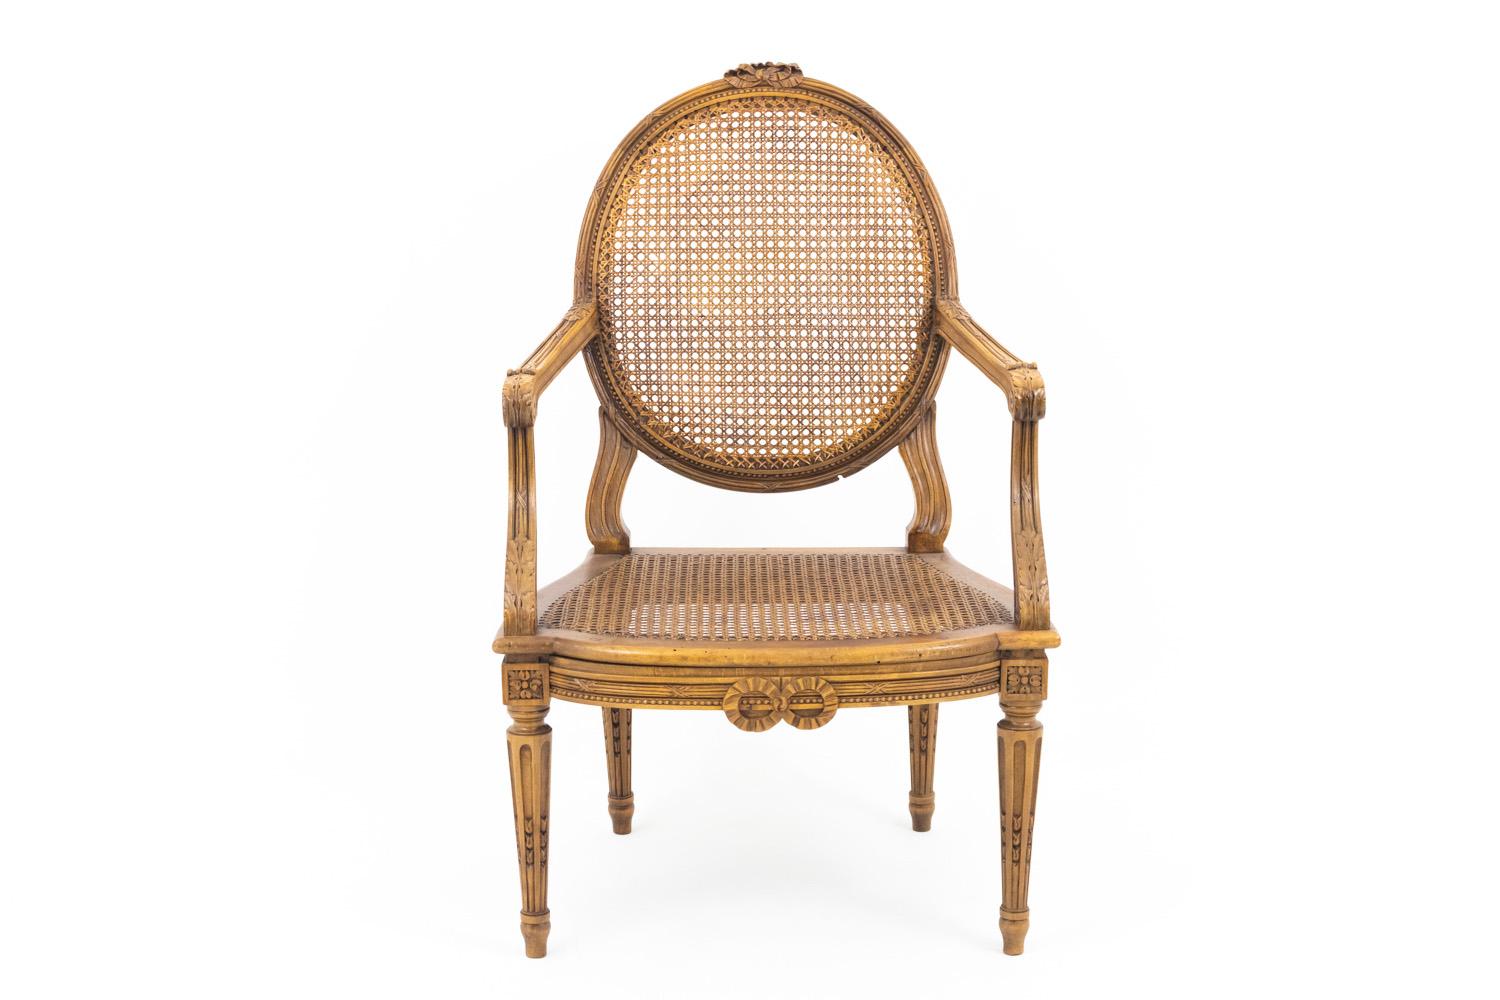 Pair of cane Louis XVI style walnut armchairs standing on four fluted tapered legs carved with chandelles (candles motifs) topped by joints carved of rosettes. Medallion back. Seat rail and stiles adorned with ribboned bulrushes, beads frieze and